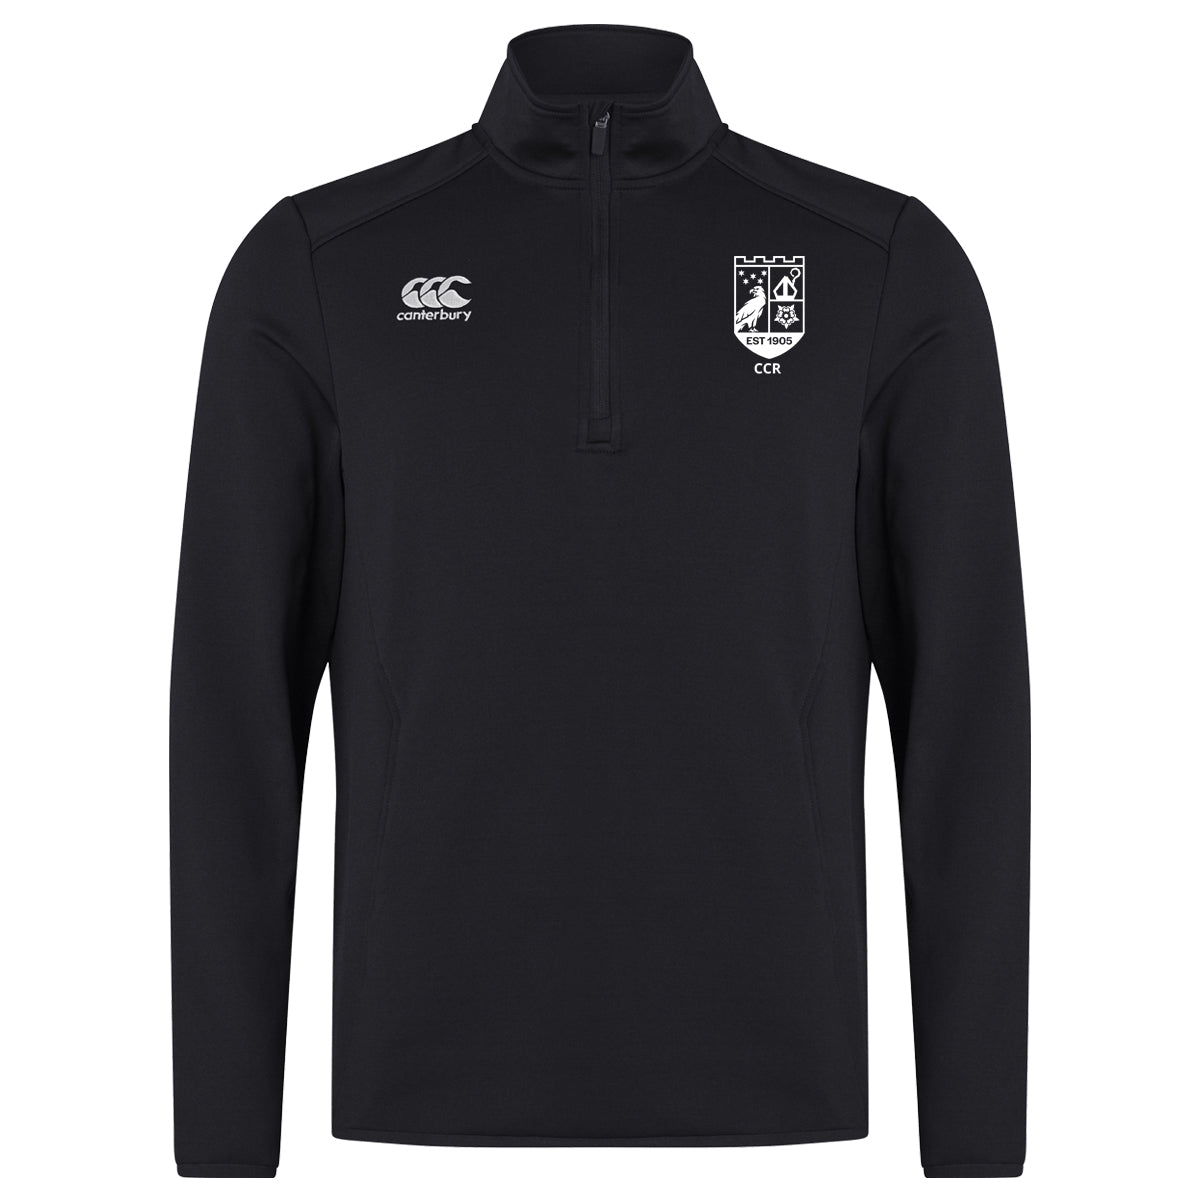 Cistercian College Roscrea 1/4 Zip Mid Layer Training Top available from Uniformity